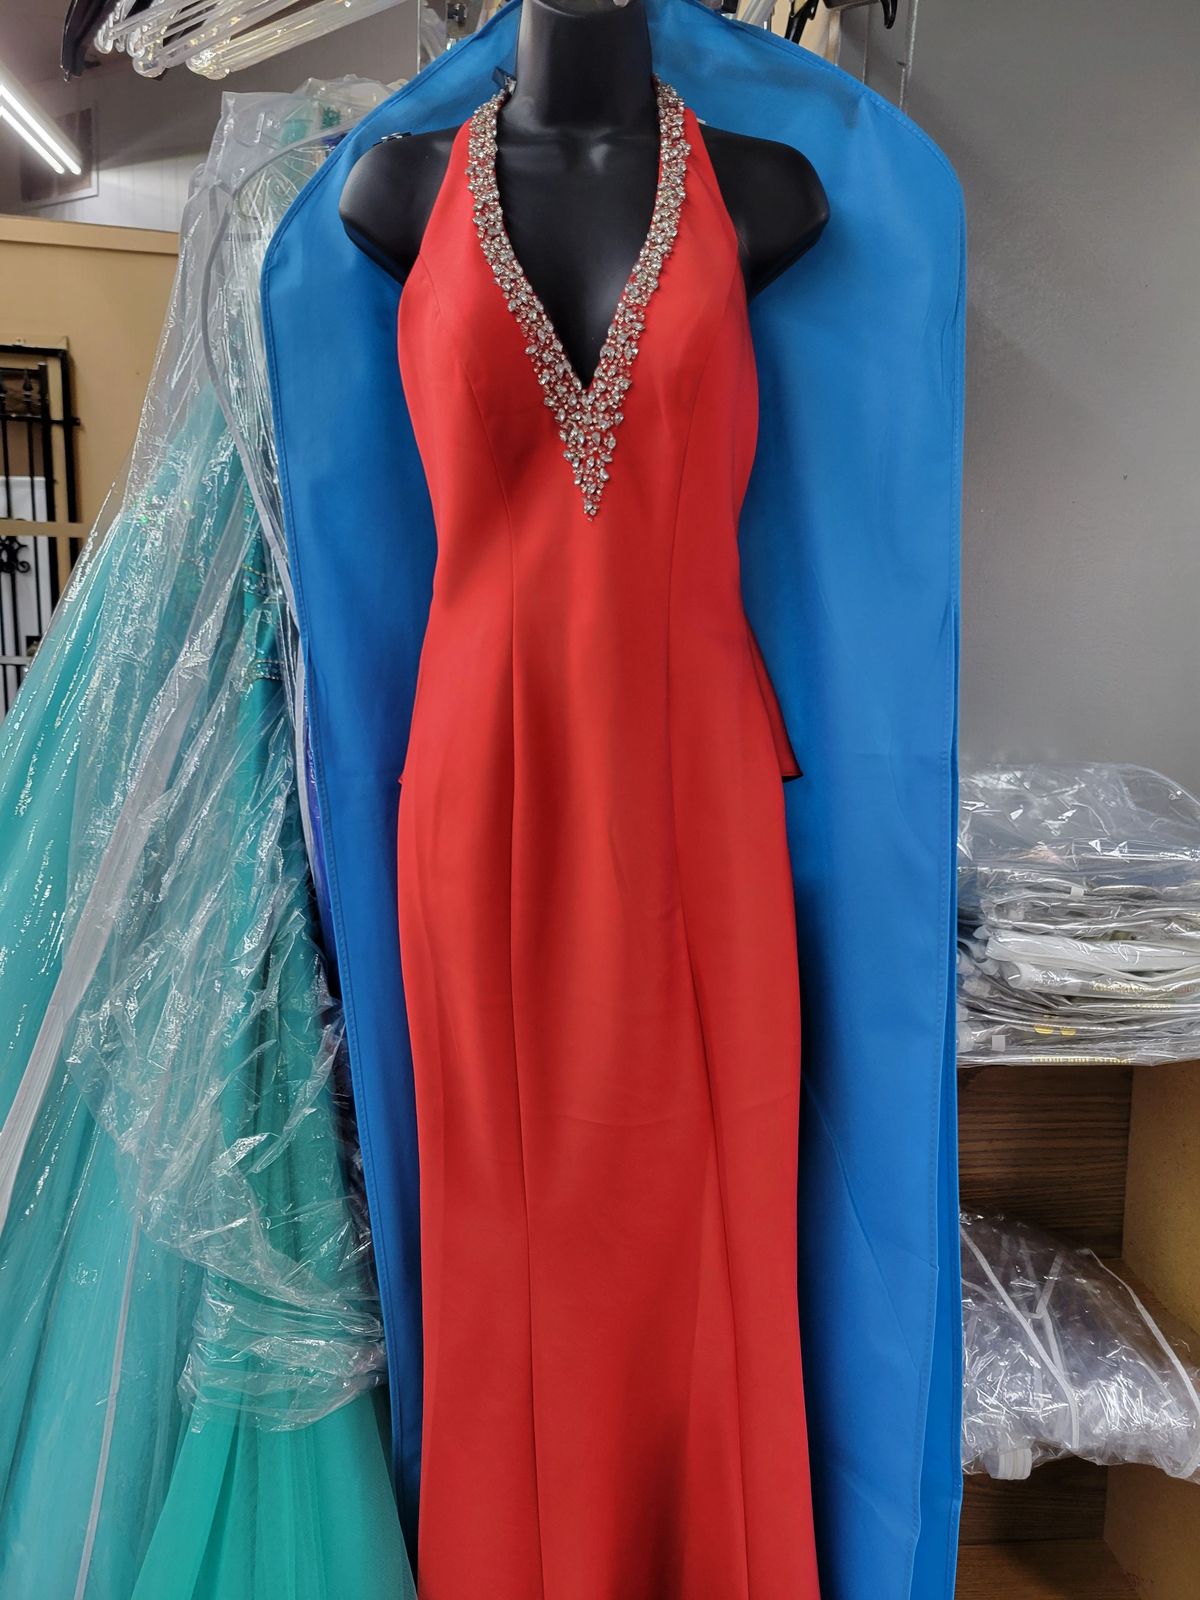 Style 3422 Dave and Johnny Red Size 4 Tall Height Dave & Johnny Silk Mermaid Dress on Queenly